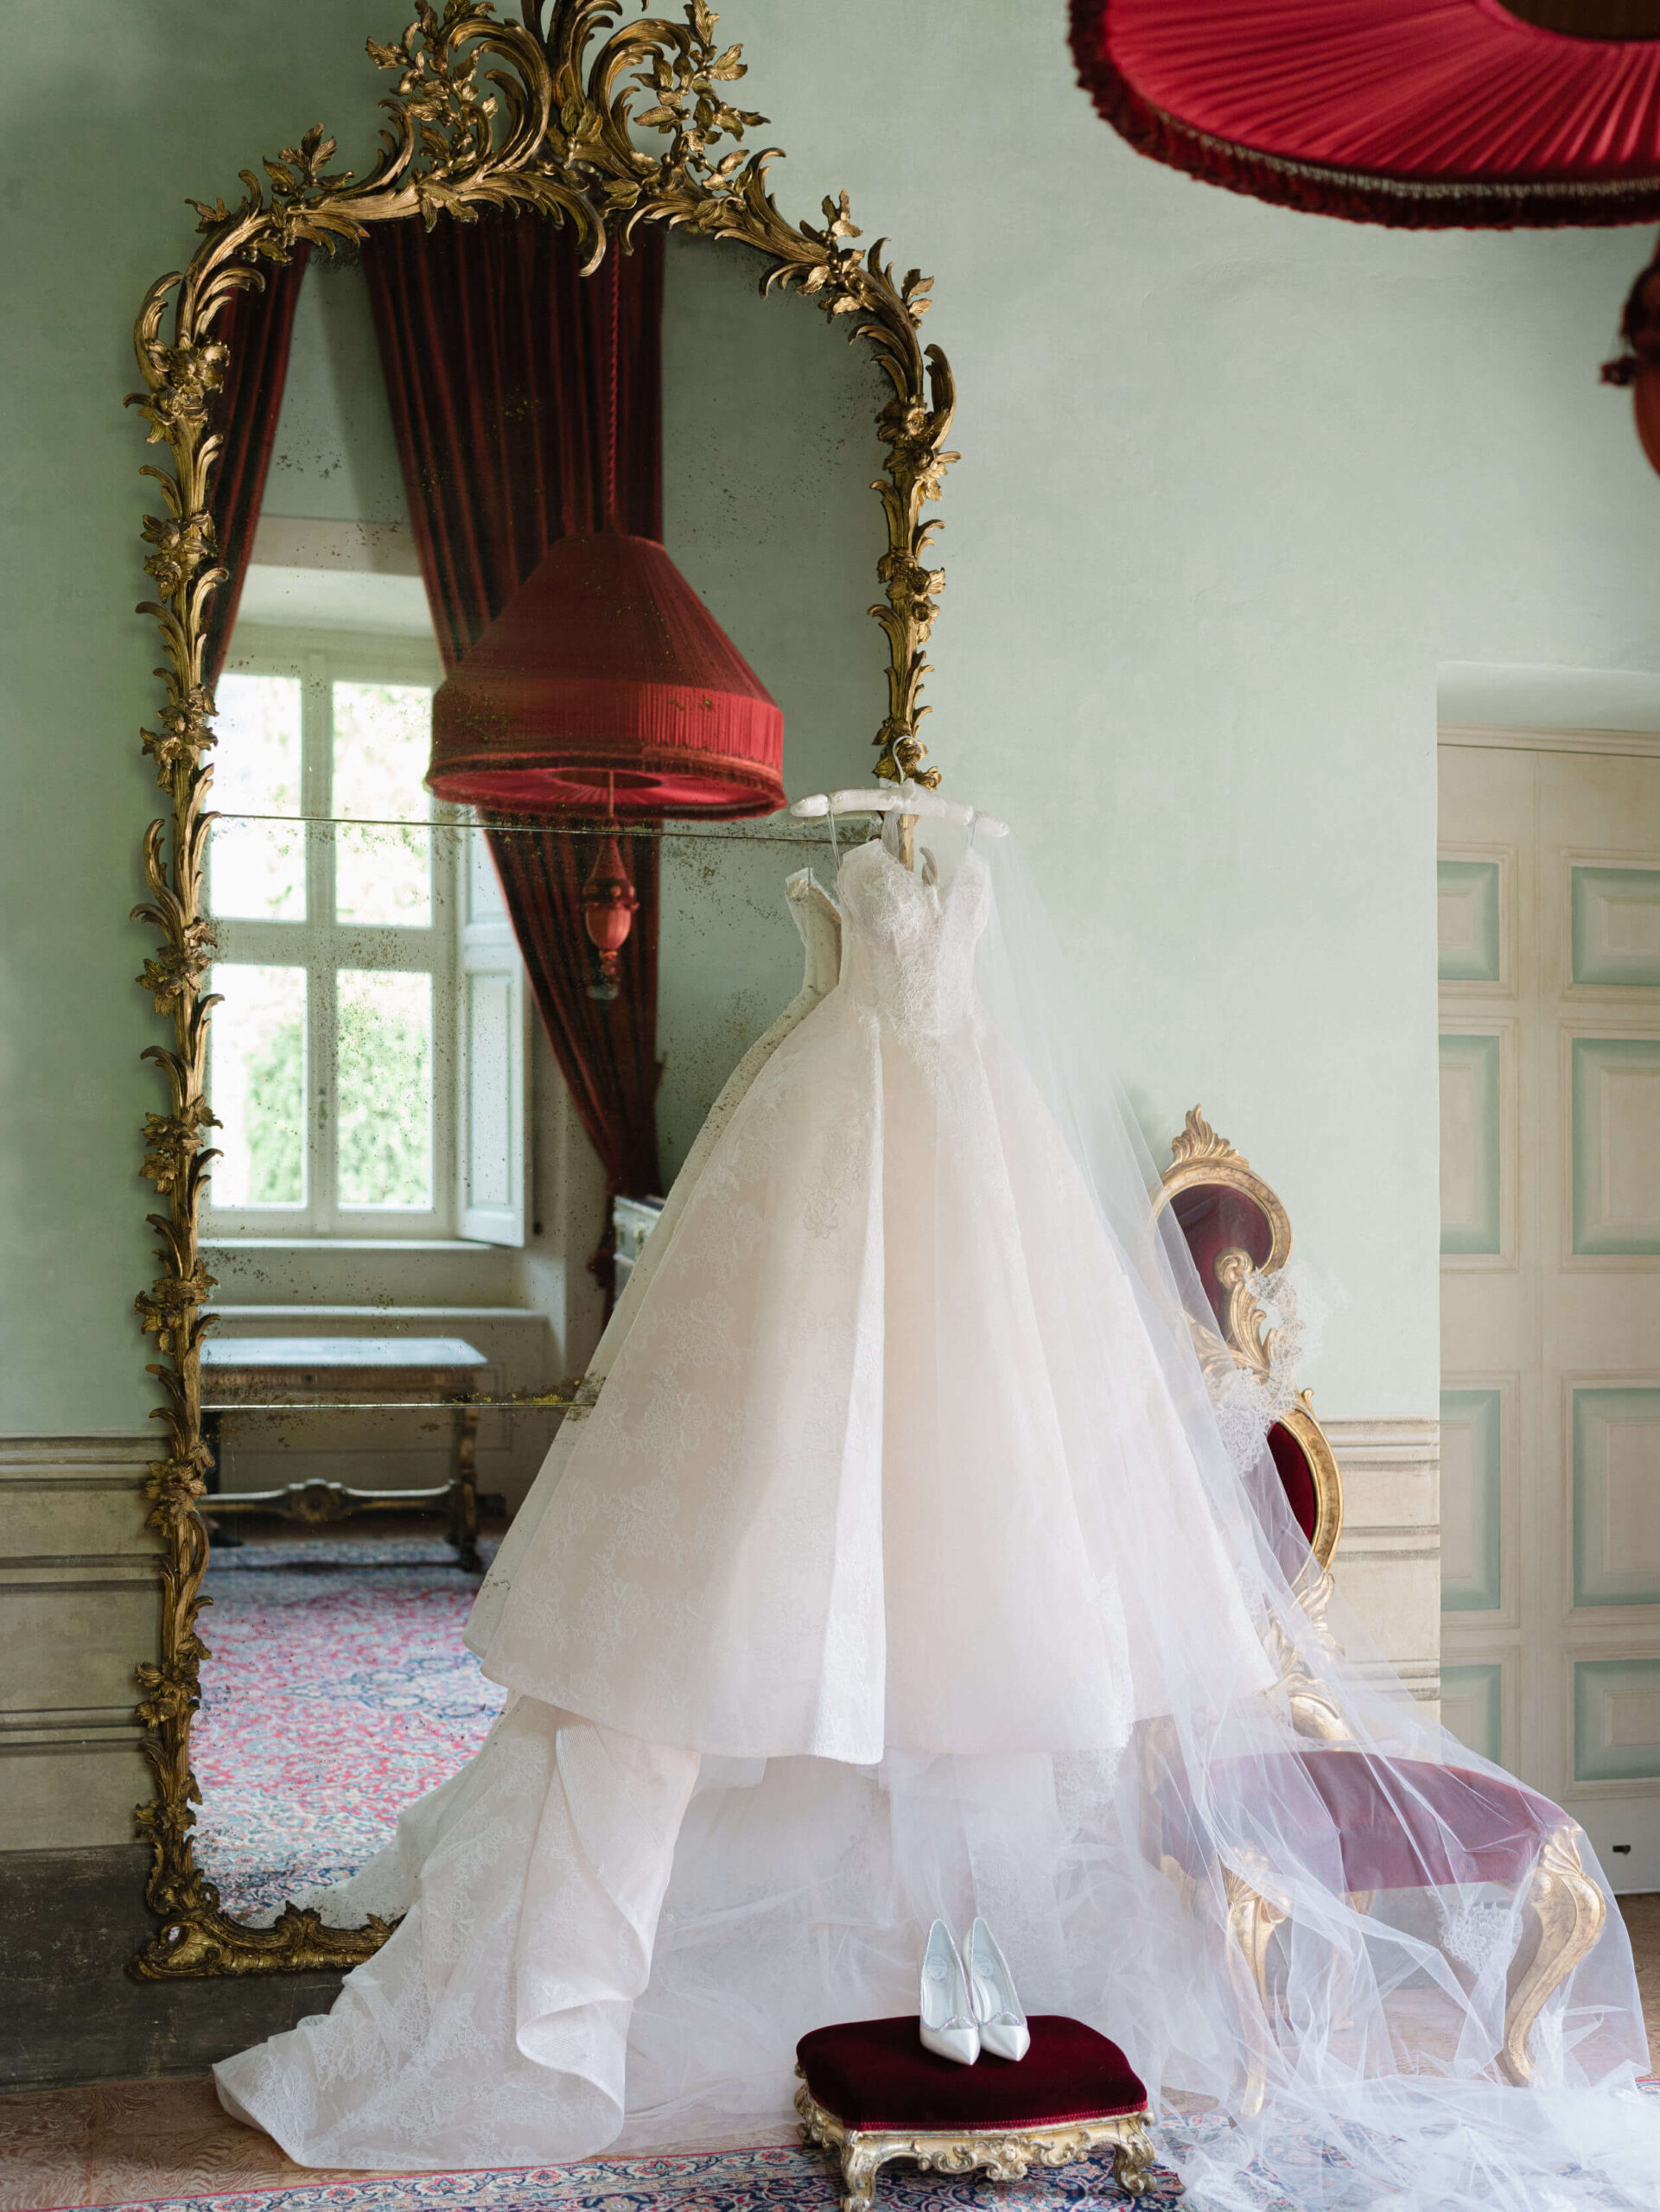 A Monique Lhuillier spring wedding gown hung up on an ornate mirror